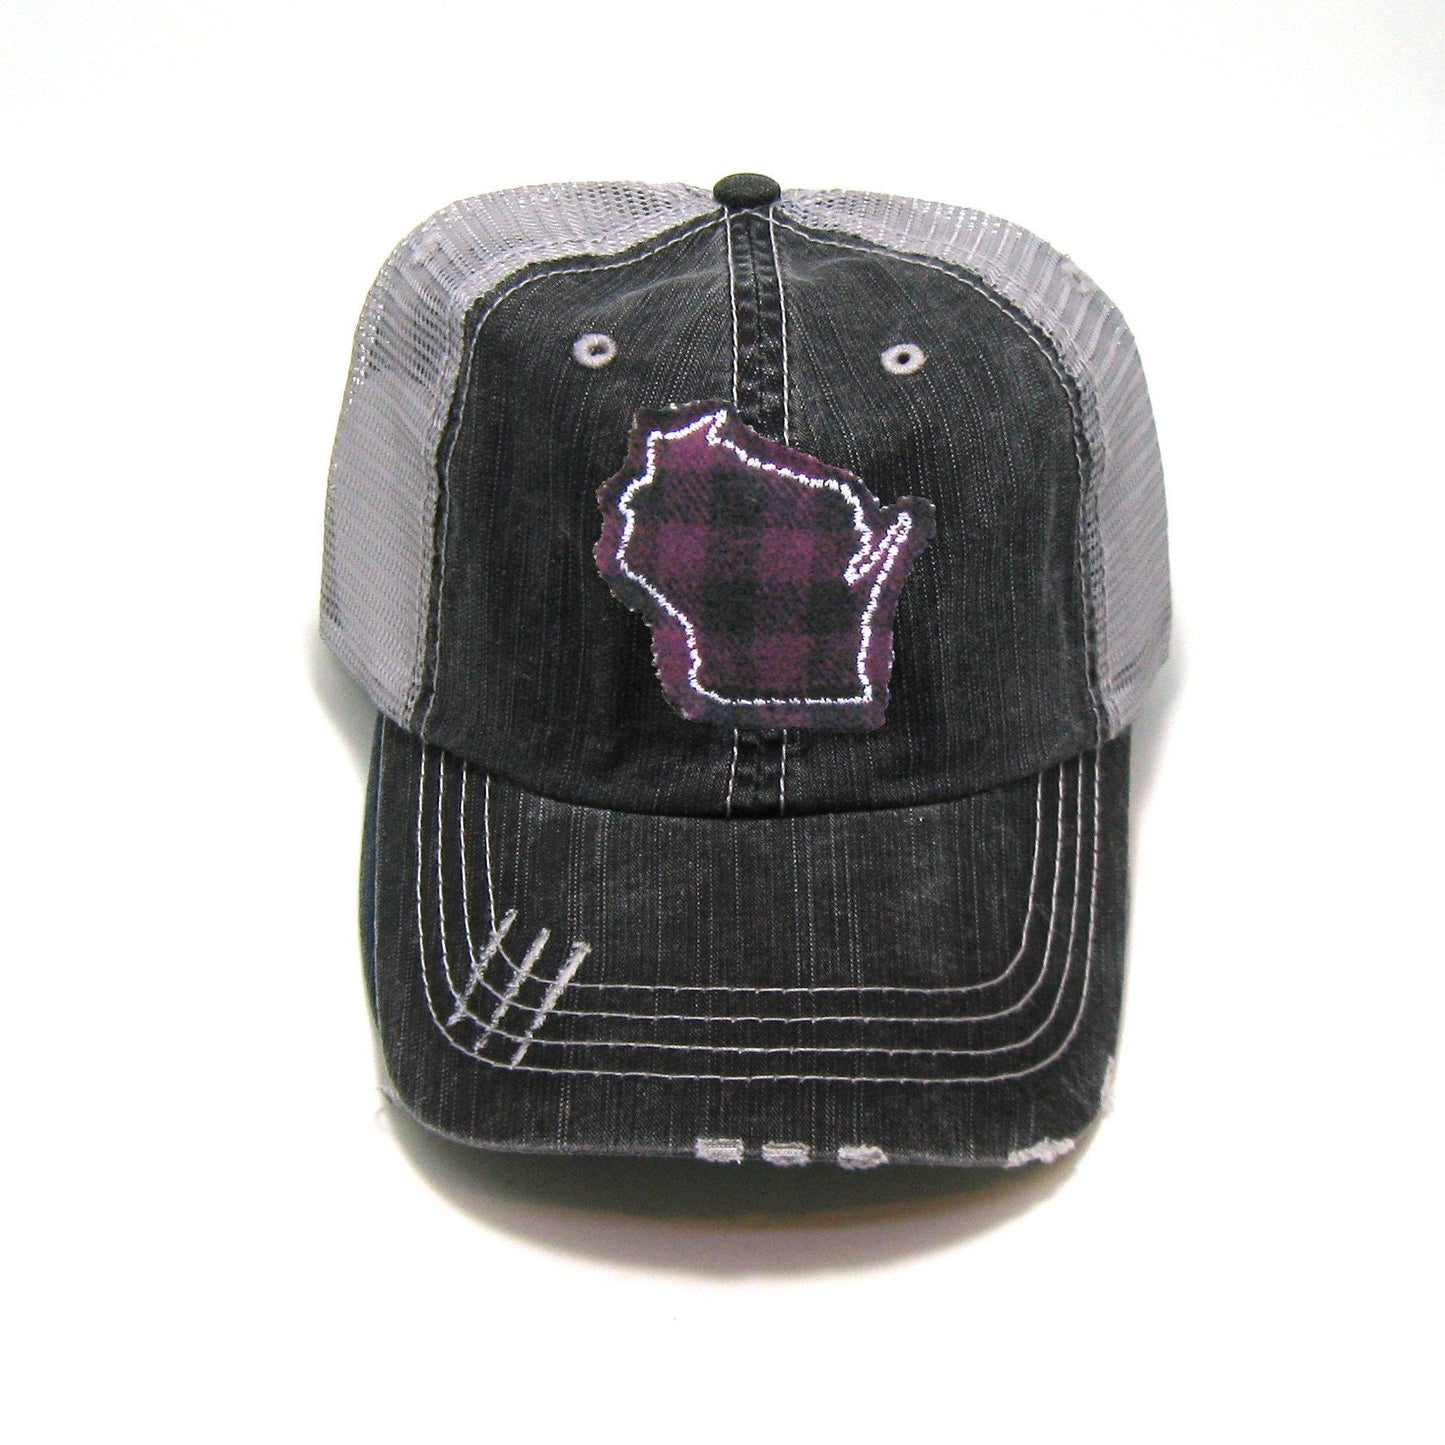 Gray Distressed Trucker Hat | Plum Buffalo Check | All US States